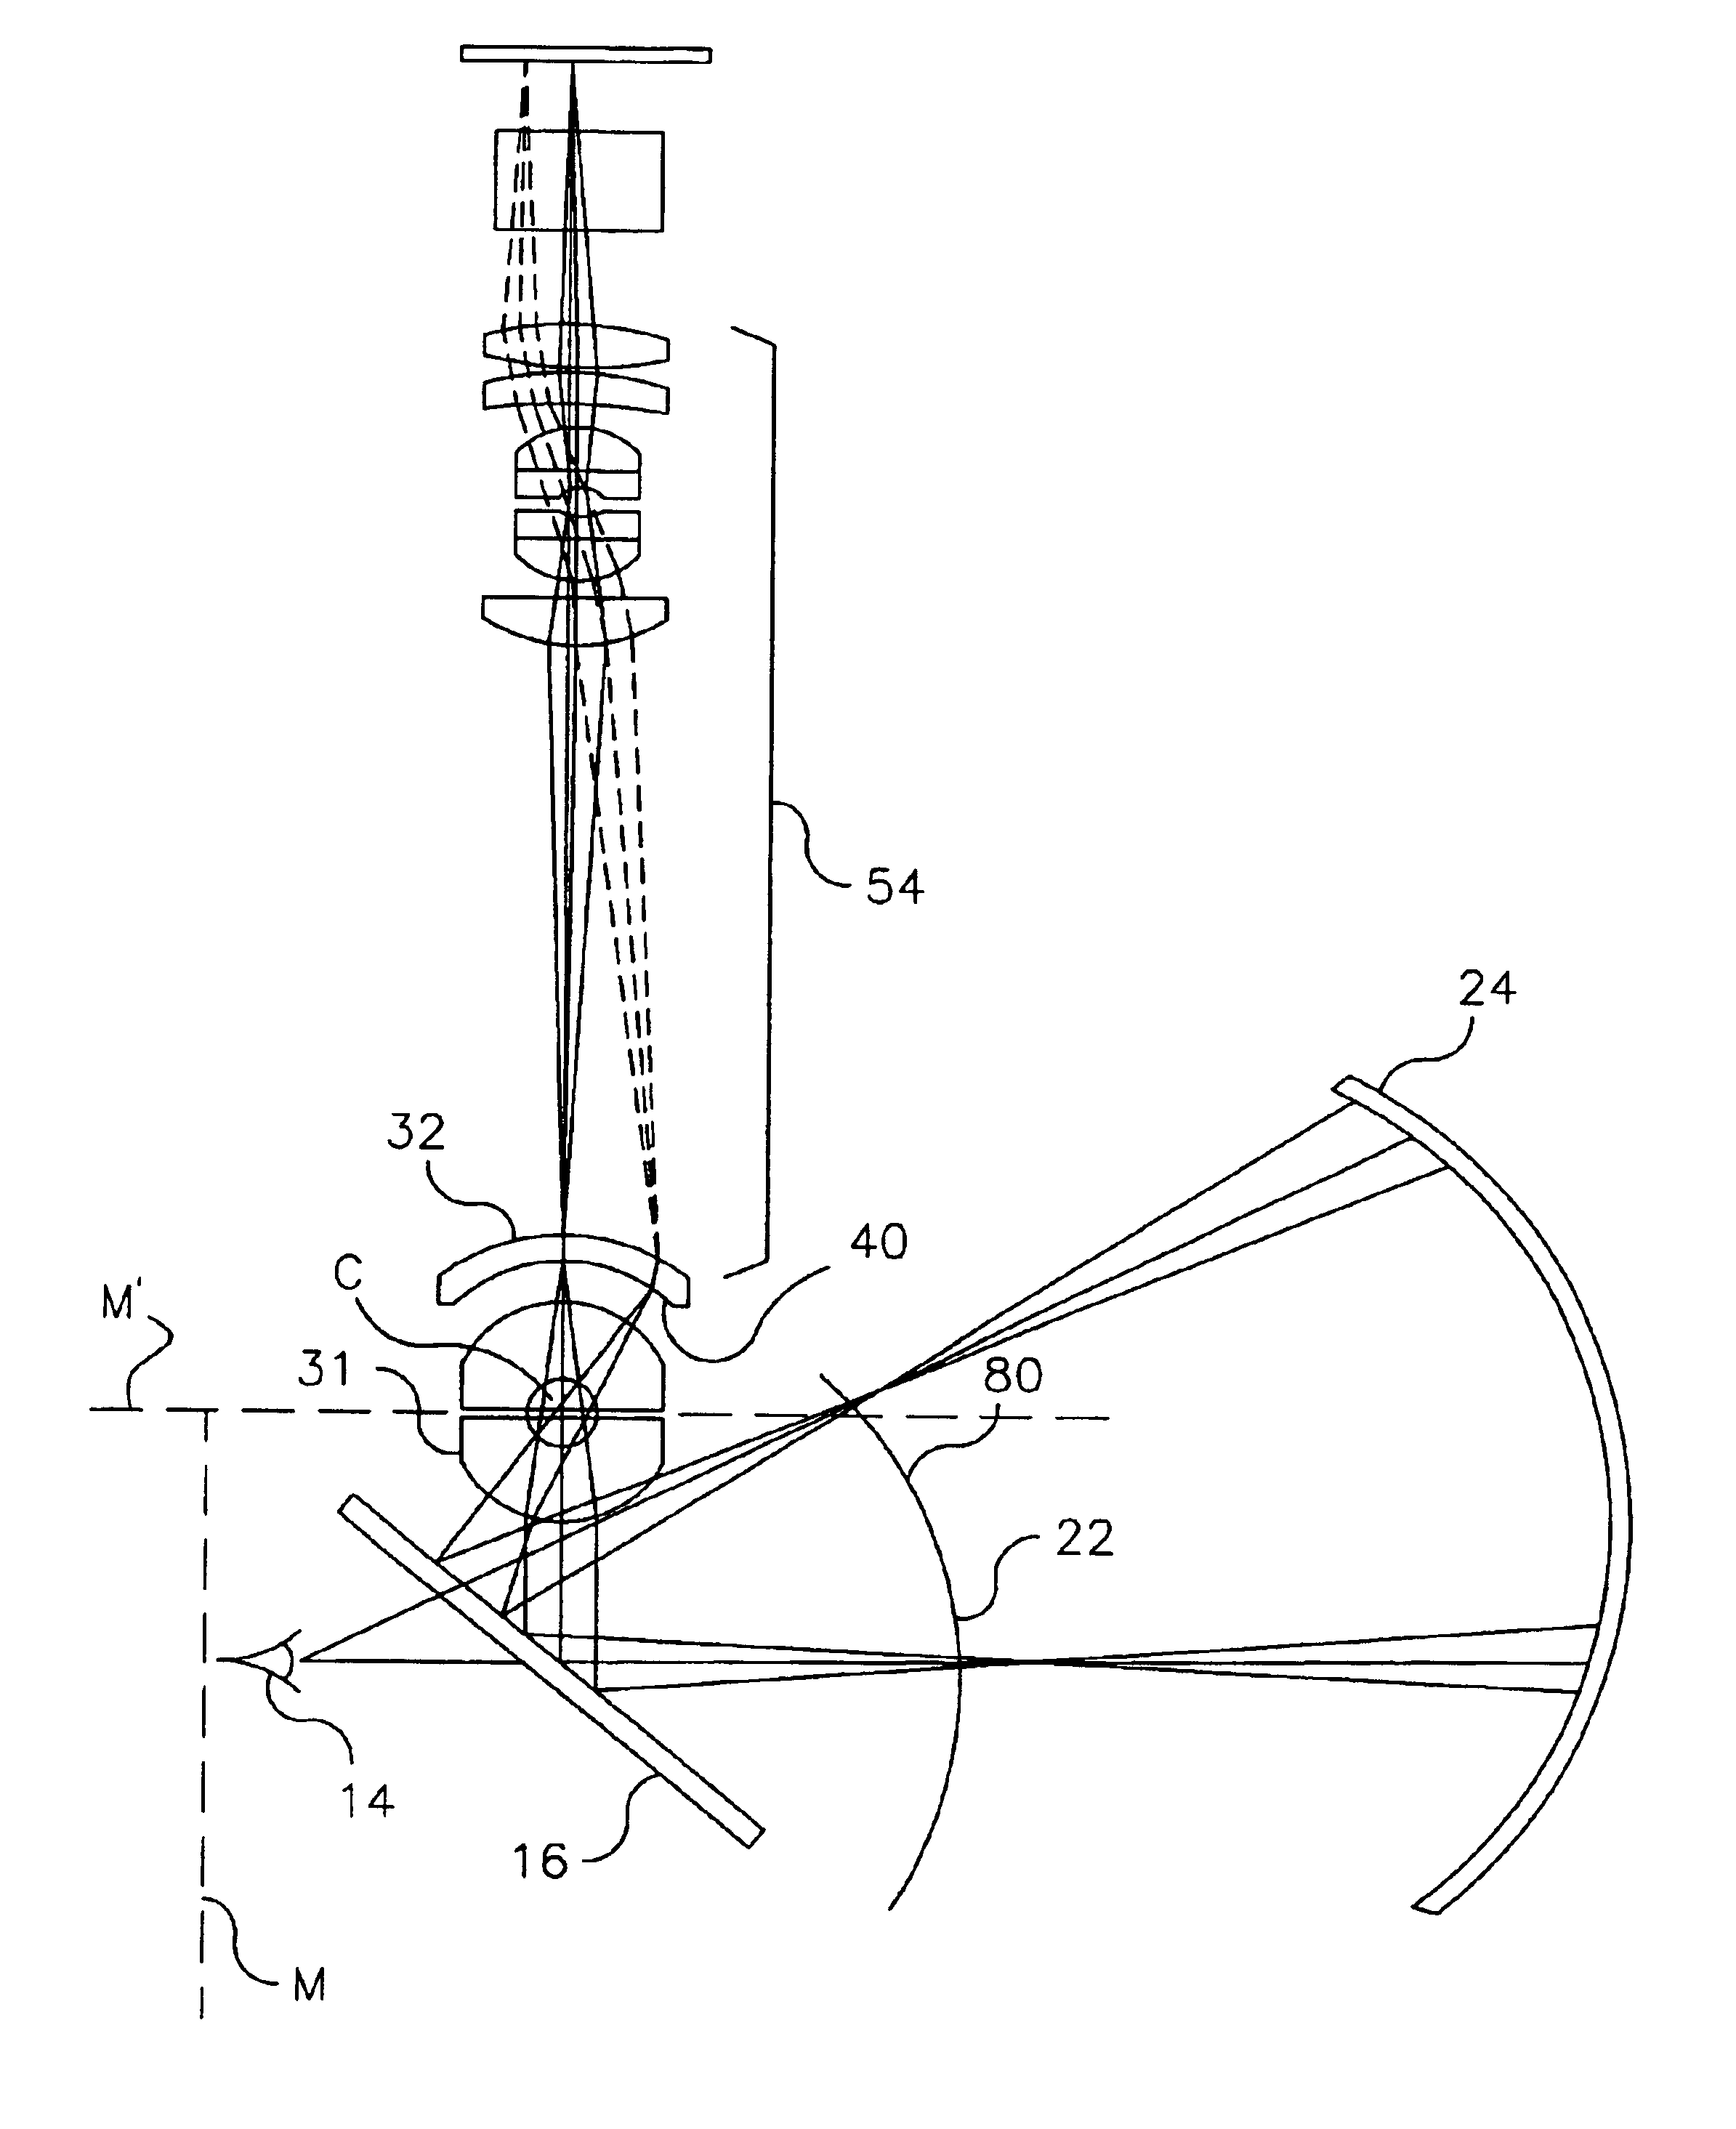 Monocentric autostereoscopic optical apparatus with a spherical gradient-index ball lens